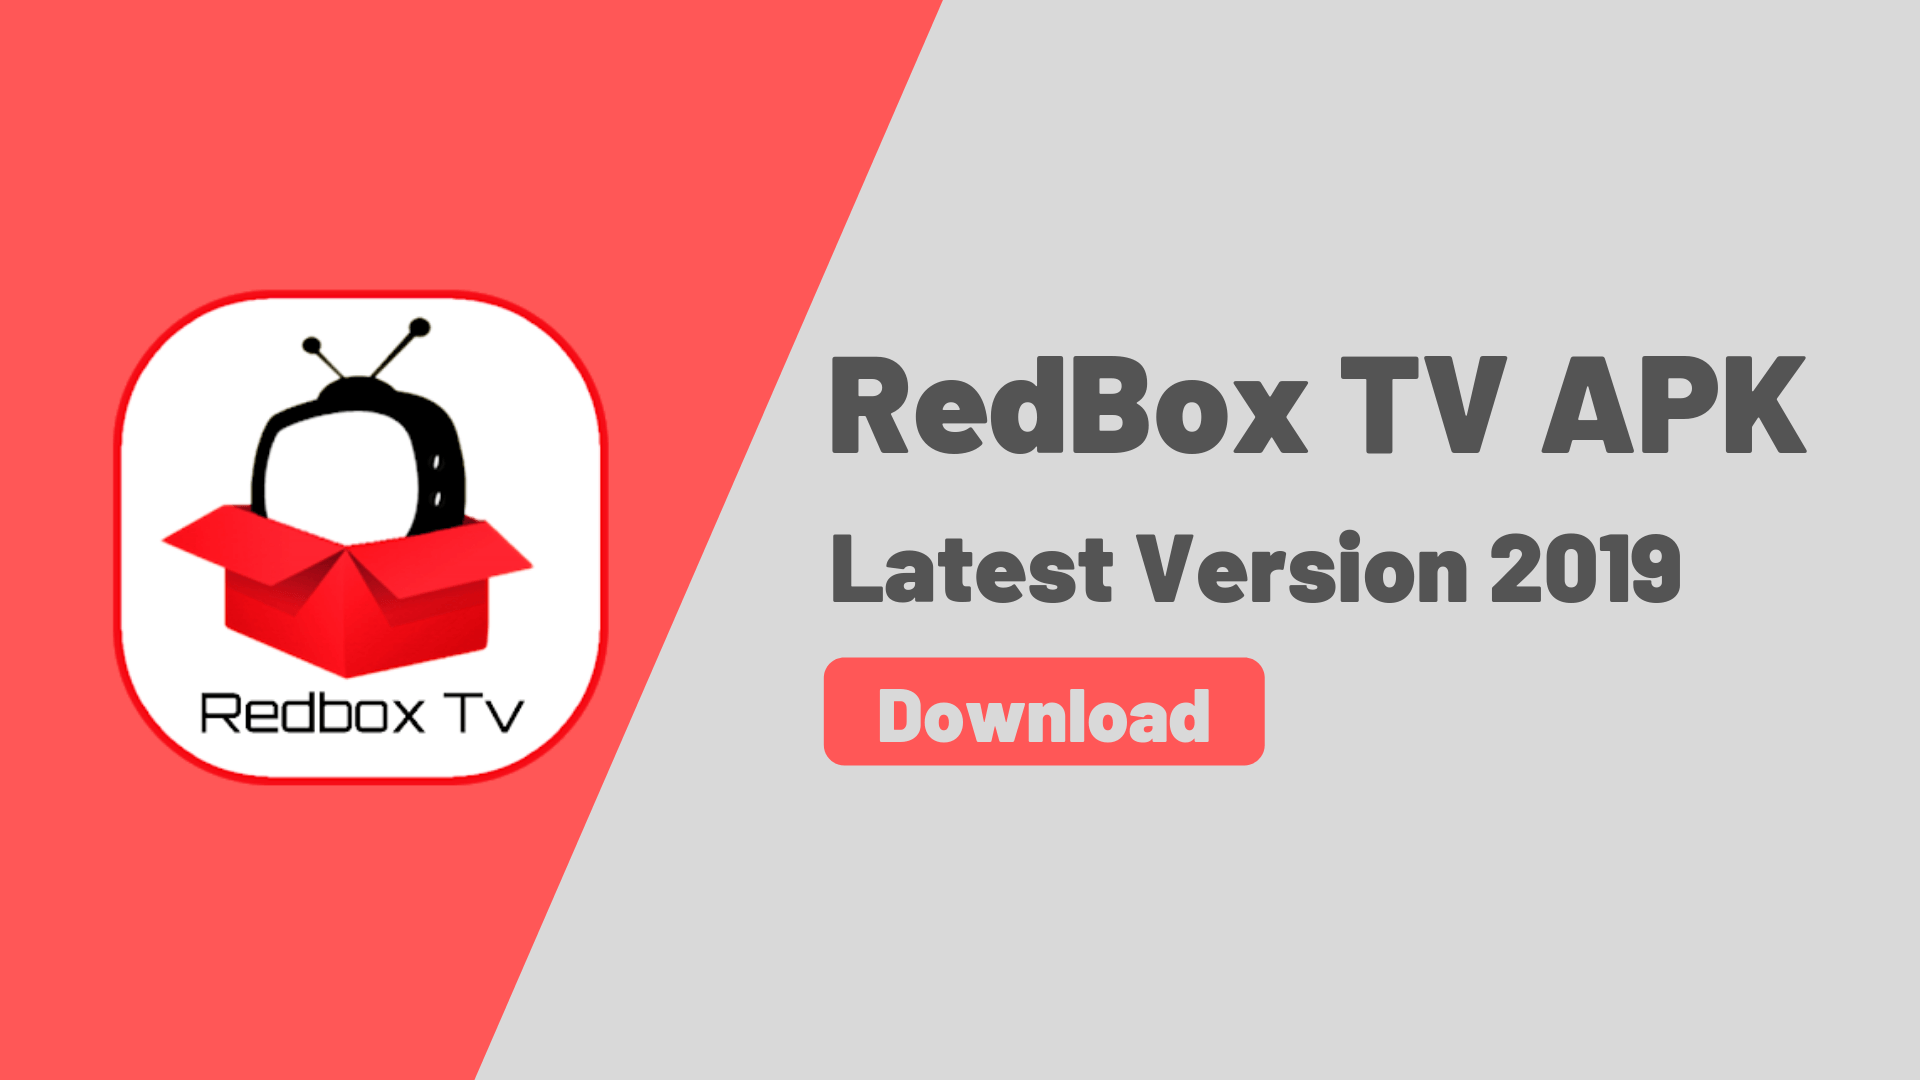 does the redbox tv app have a tv guide